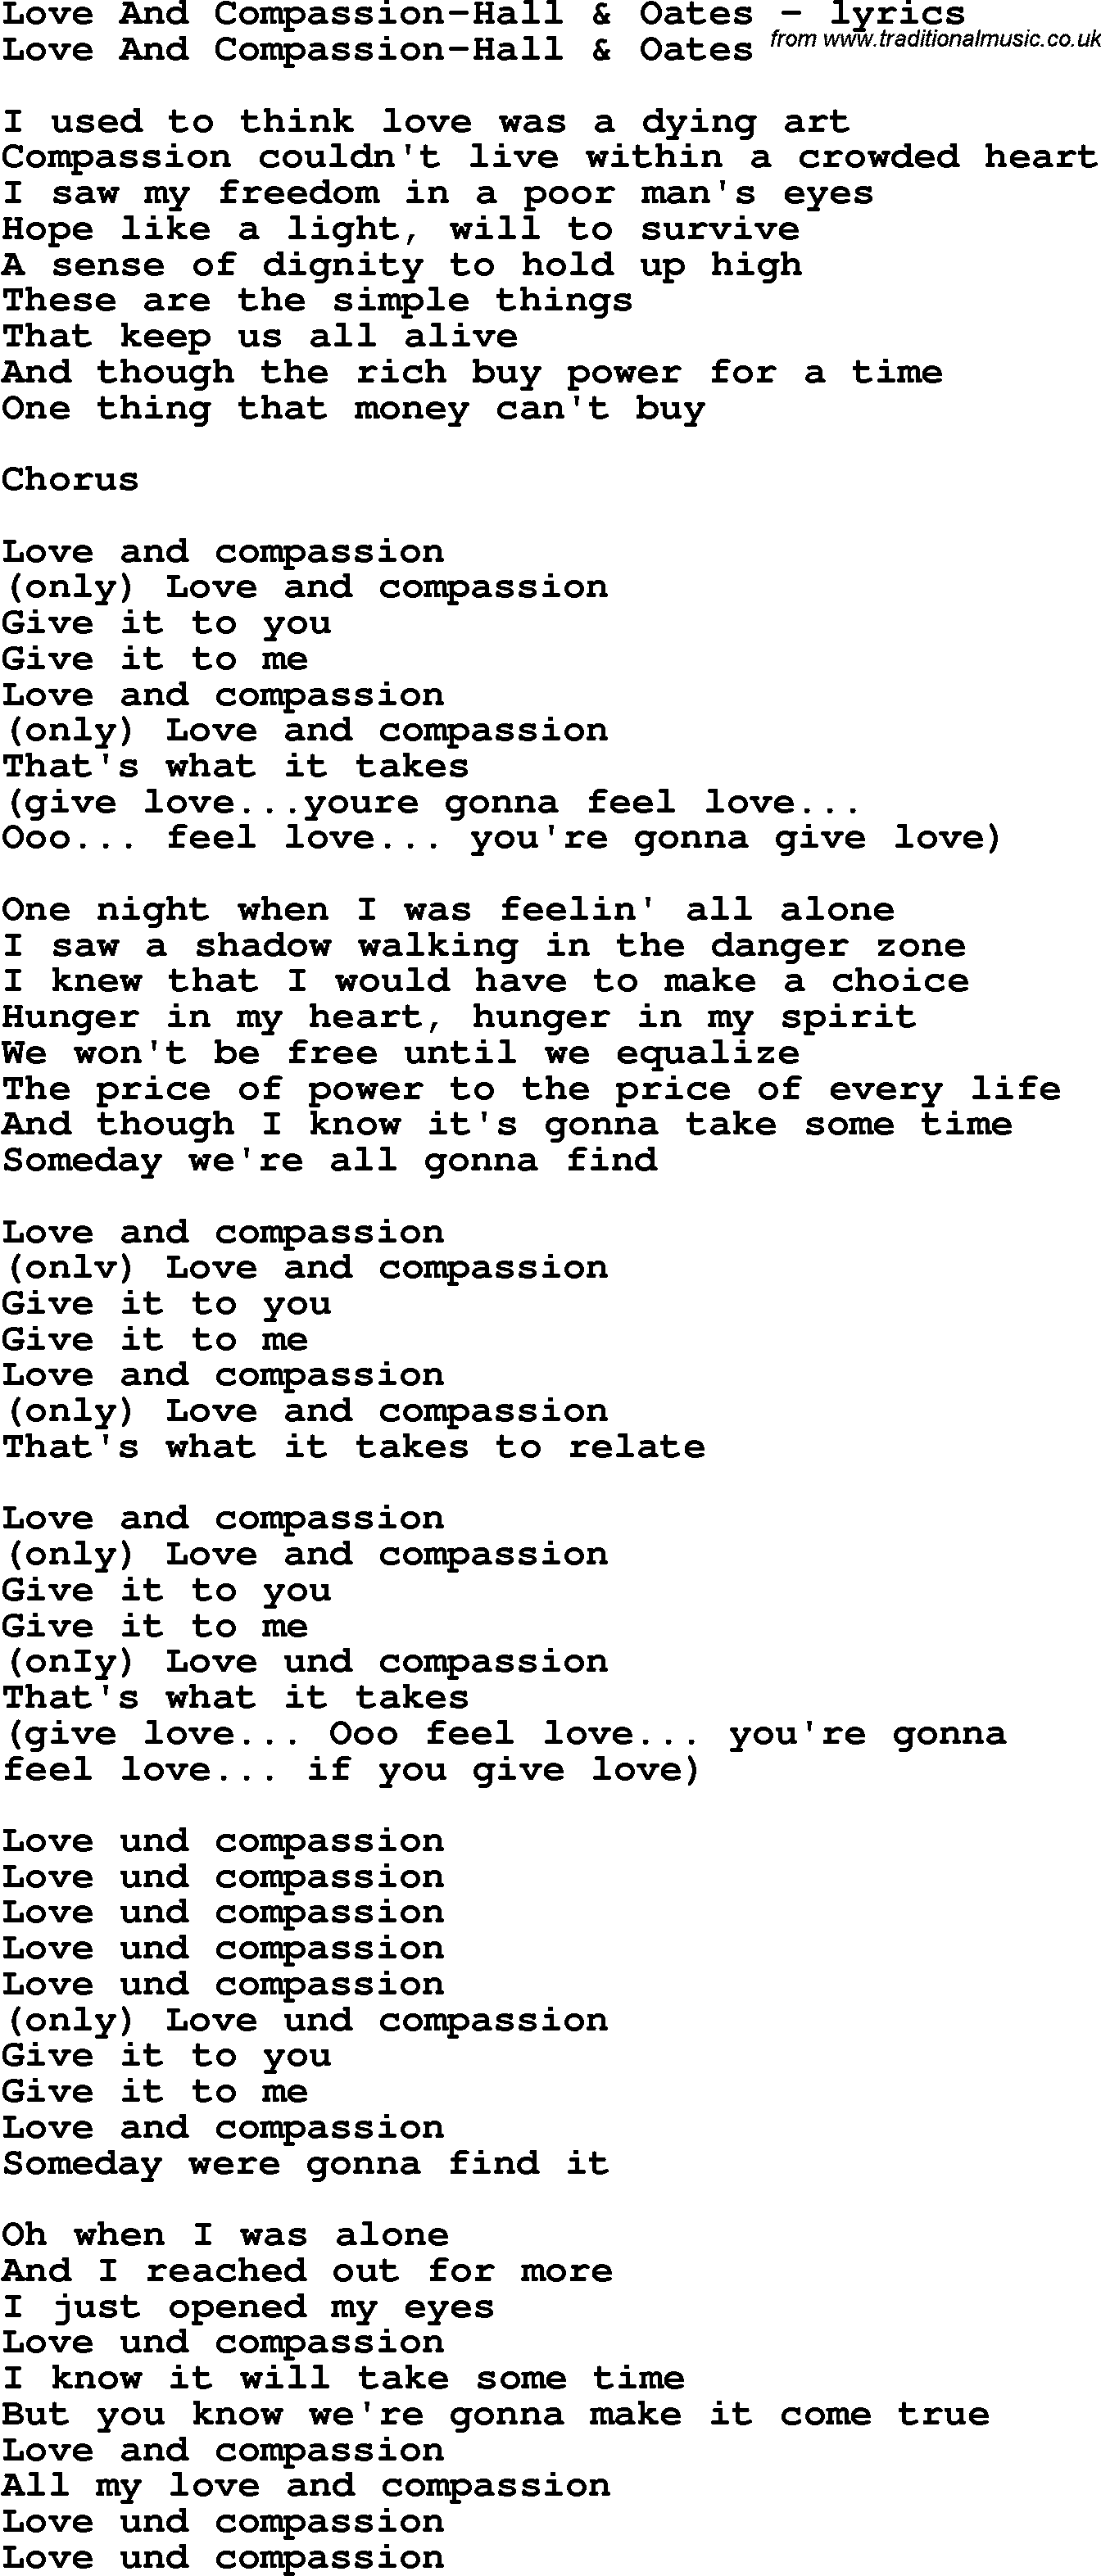 Love Song Lyrics for: Love And Compassion-Hall & Oates